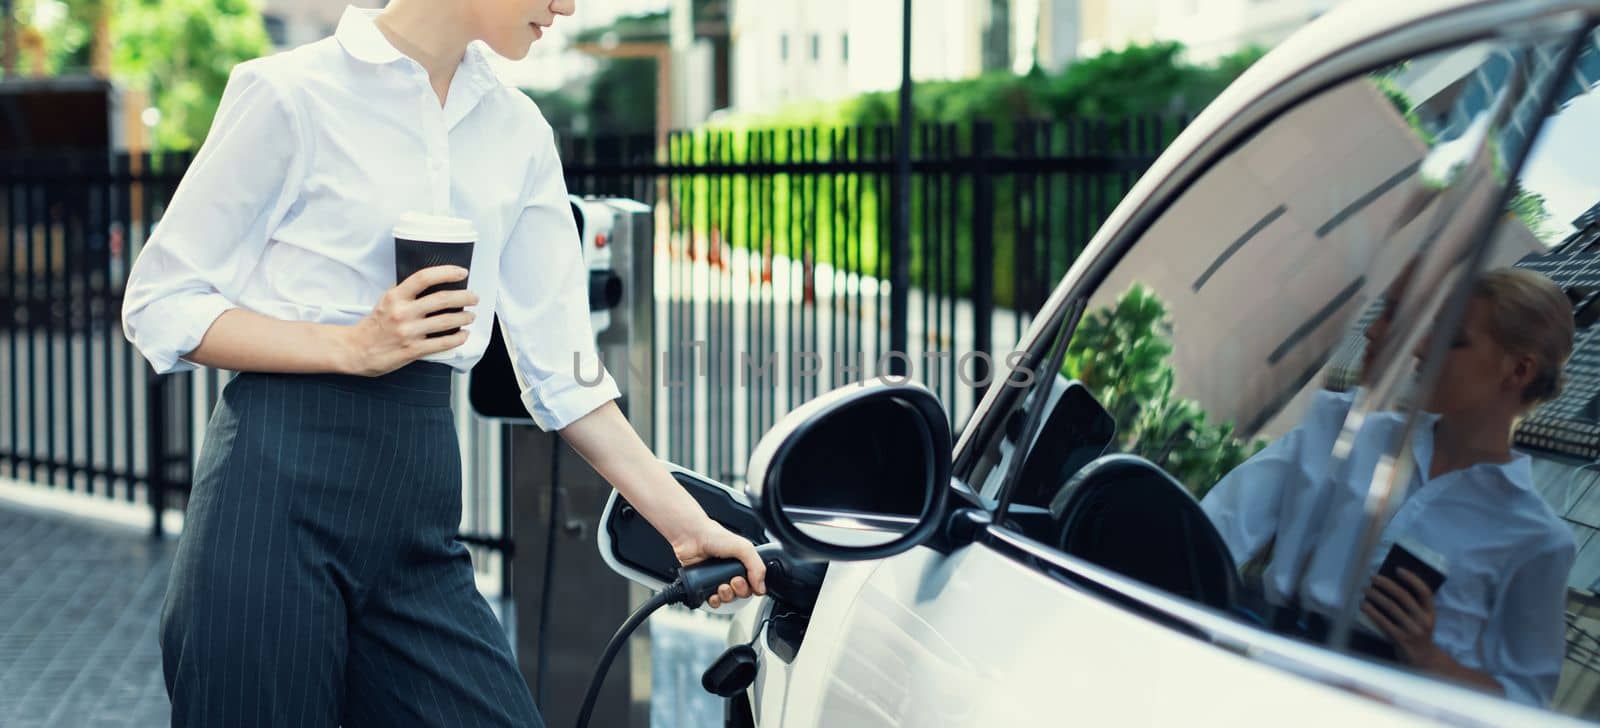 Closeup businesswoman holding coffee, insert EV charger to electric vehicle at public charging station. Eco-friendly car using clean and renewable energy for progressive lifestyle in city.